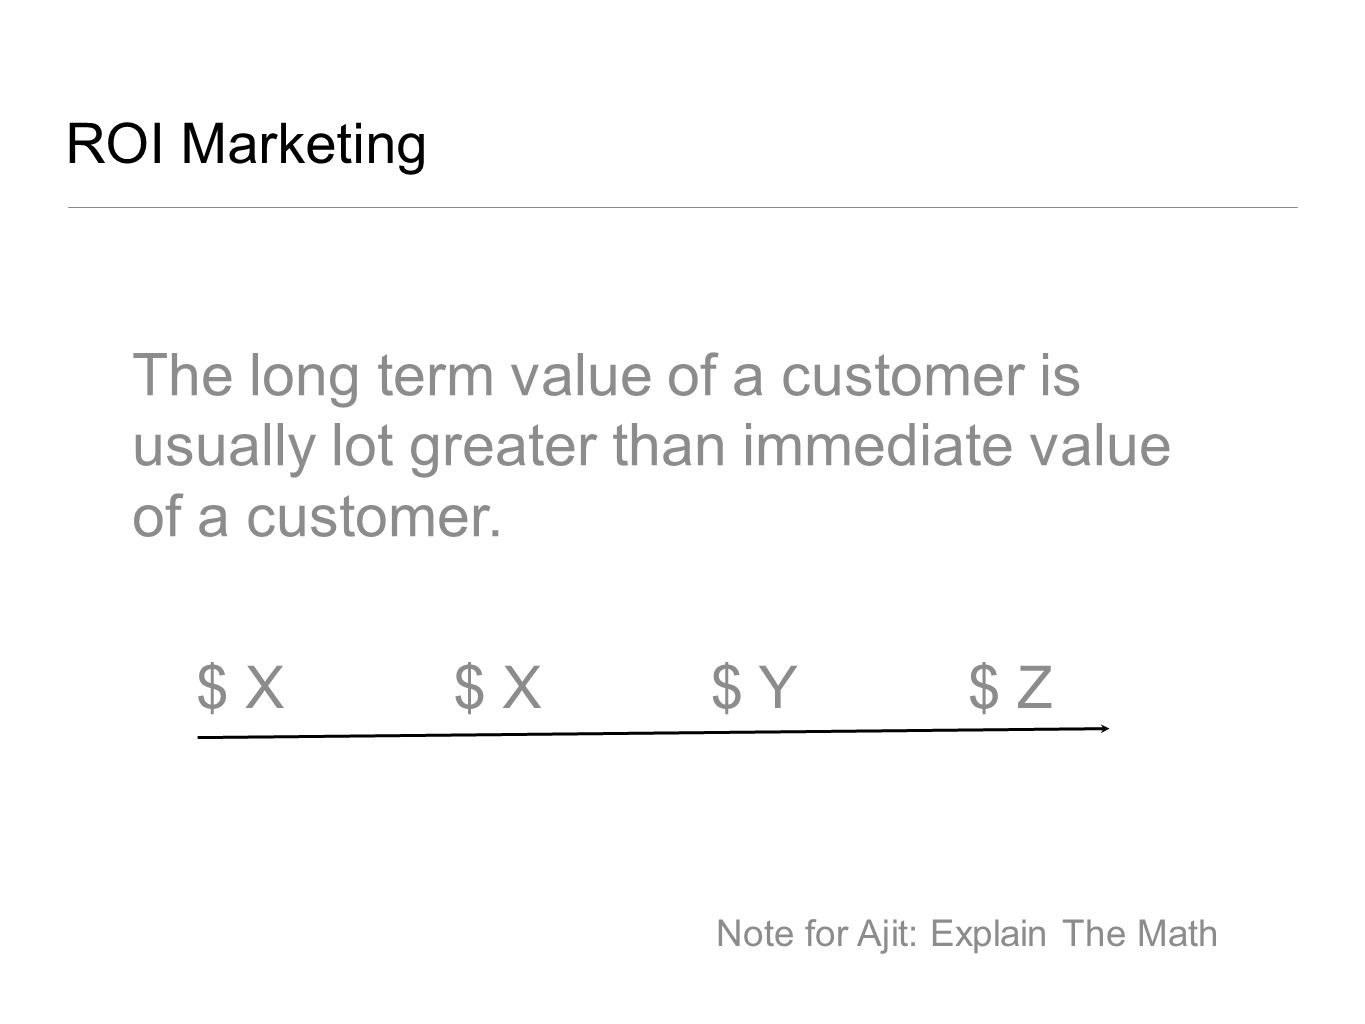 ROI Marketing The long term value of a customer is usually lot greater than immediate value of a customer.